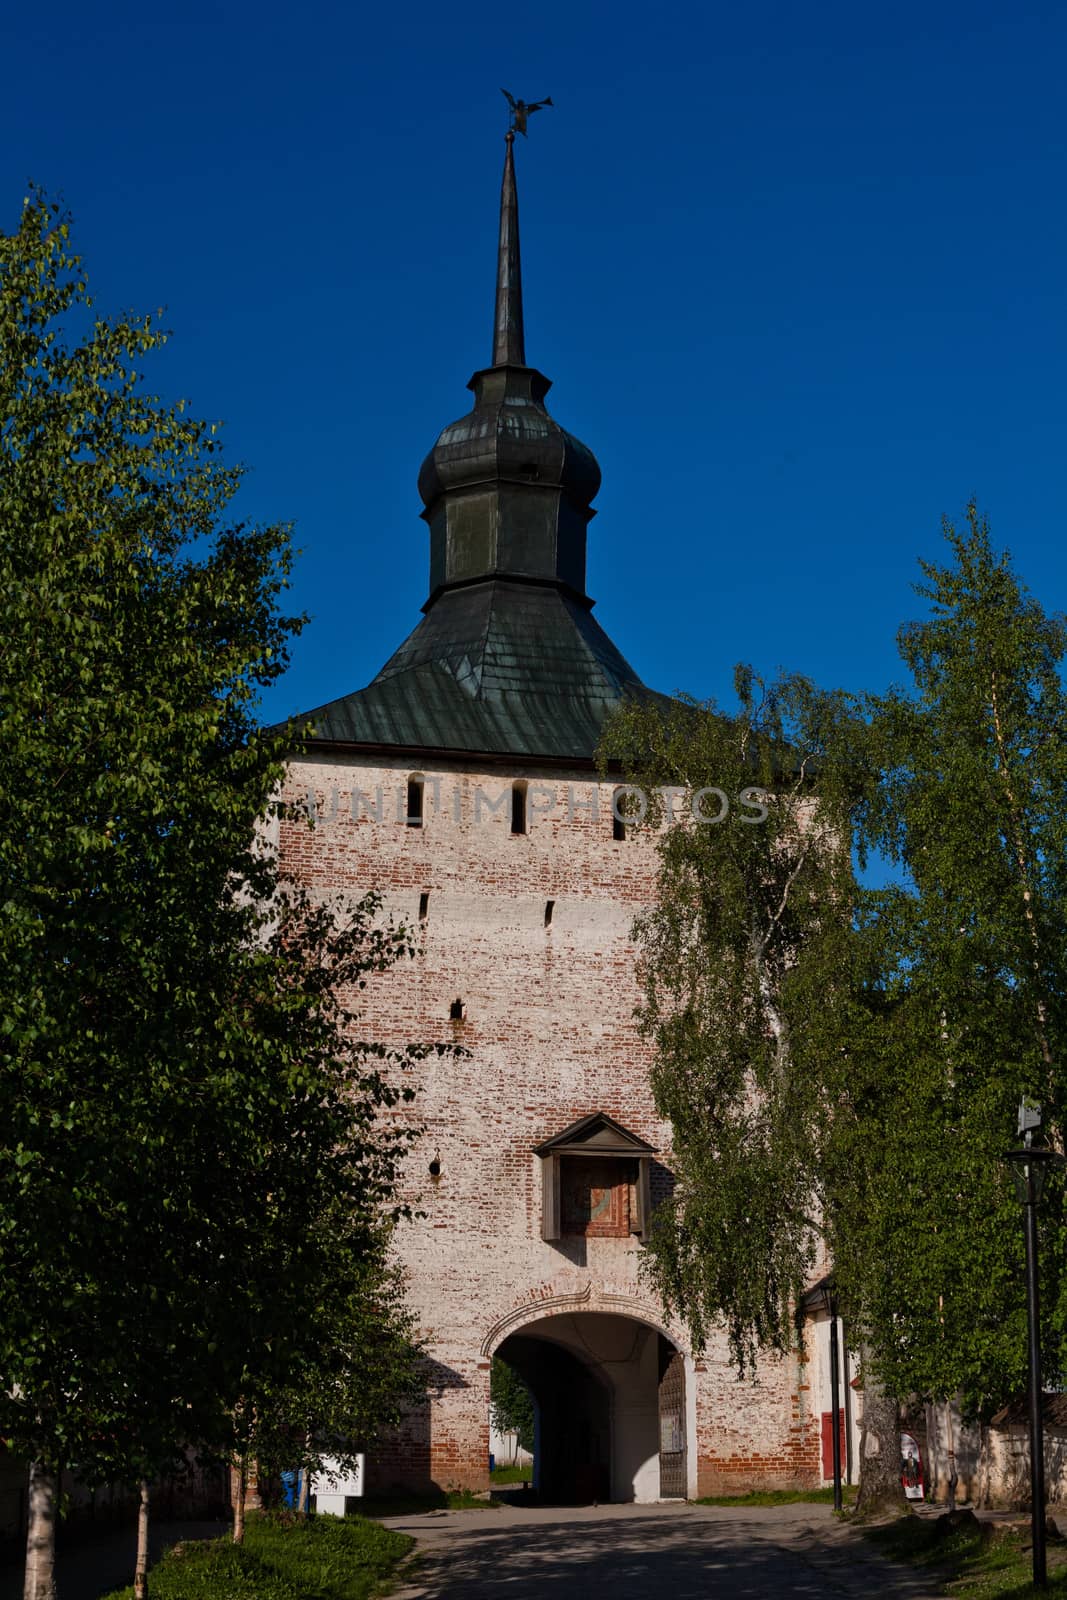 A big white tower with small gate
